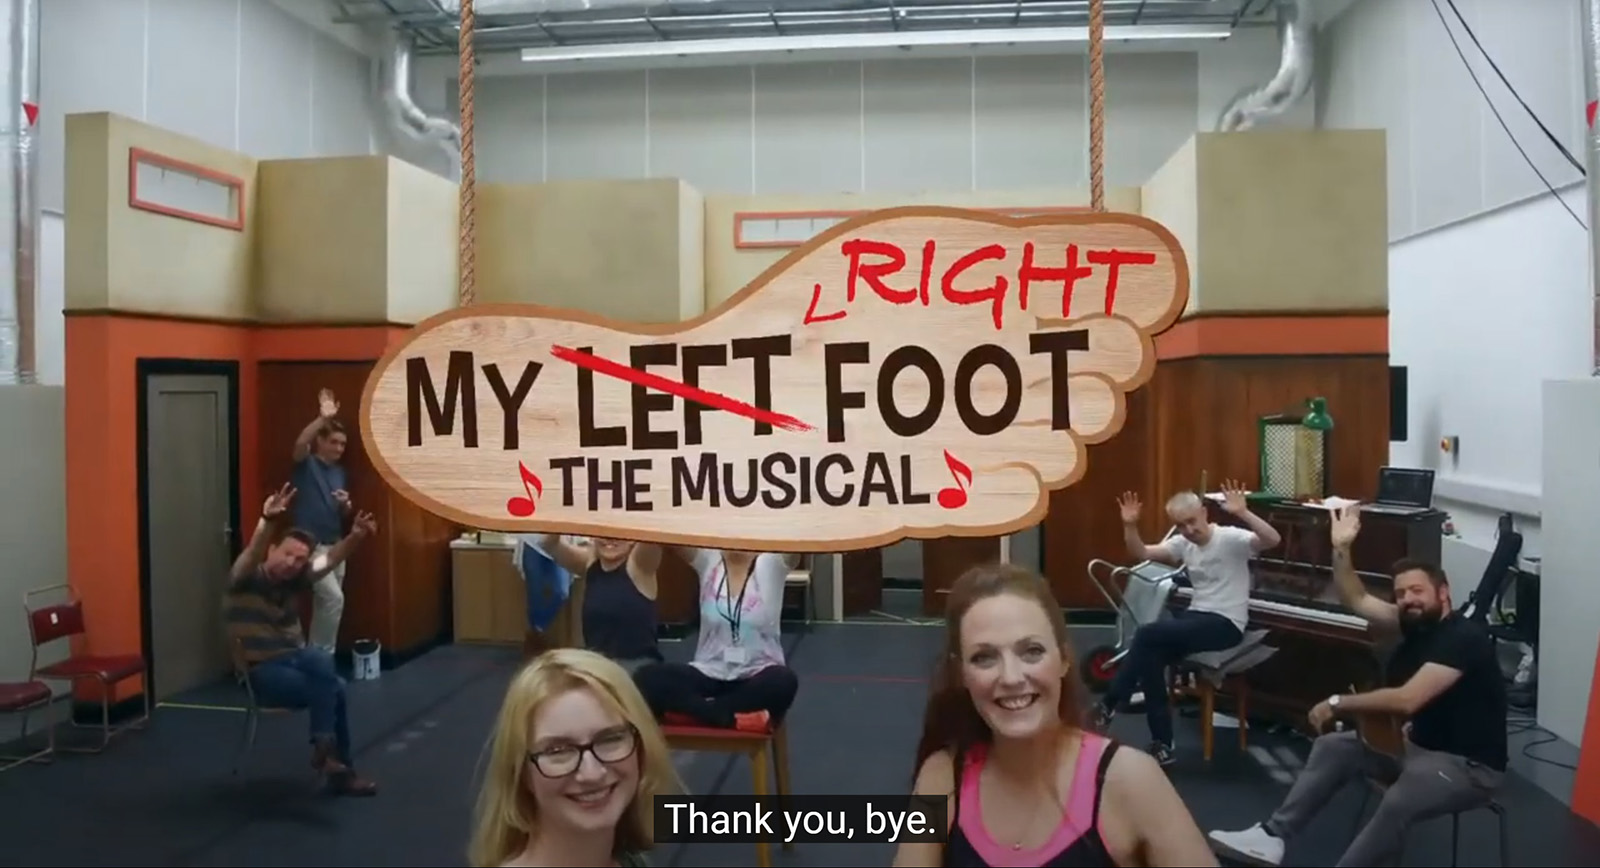 〈MY LEFT RIGHT FOOT〉(BSL trailer) (source: YouTube channel of Birds of Paradise)